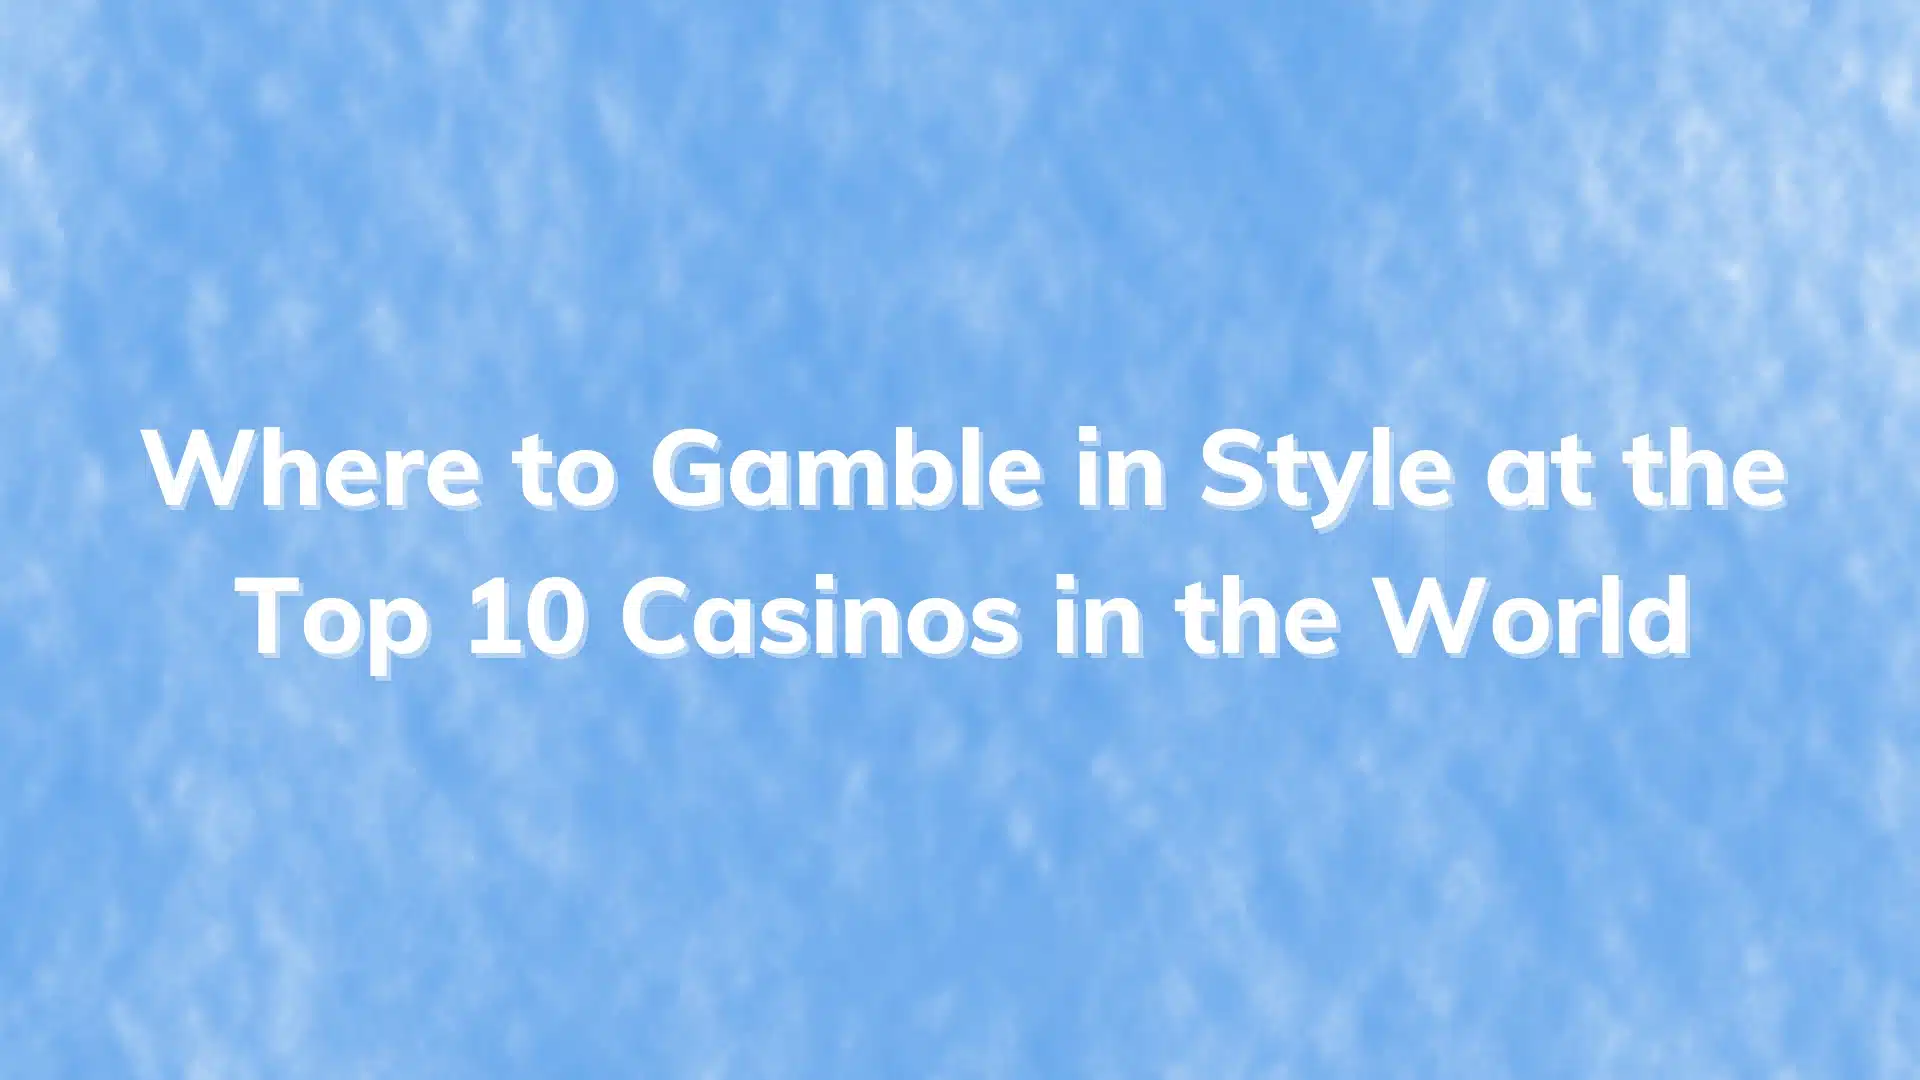 Where to Gamble in Style at the Top 10 Casinos in the World